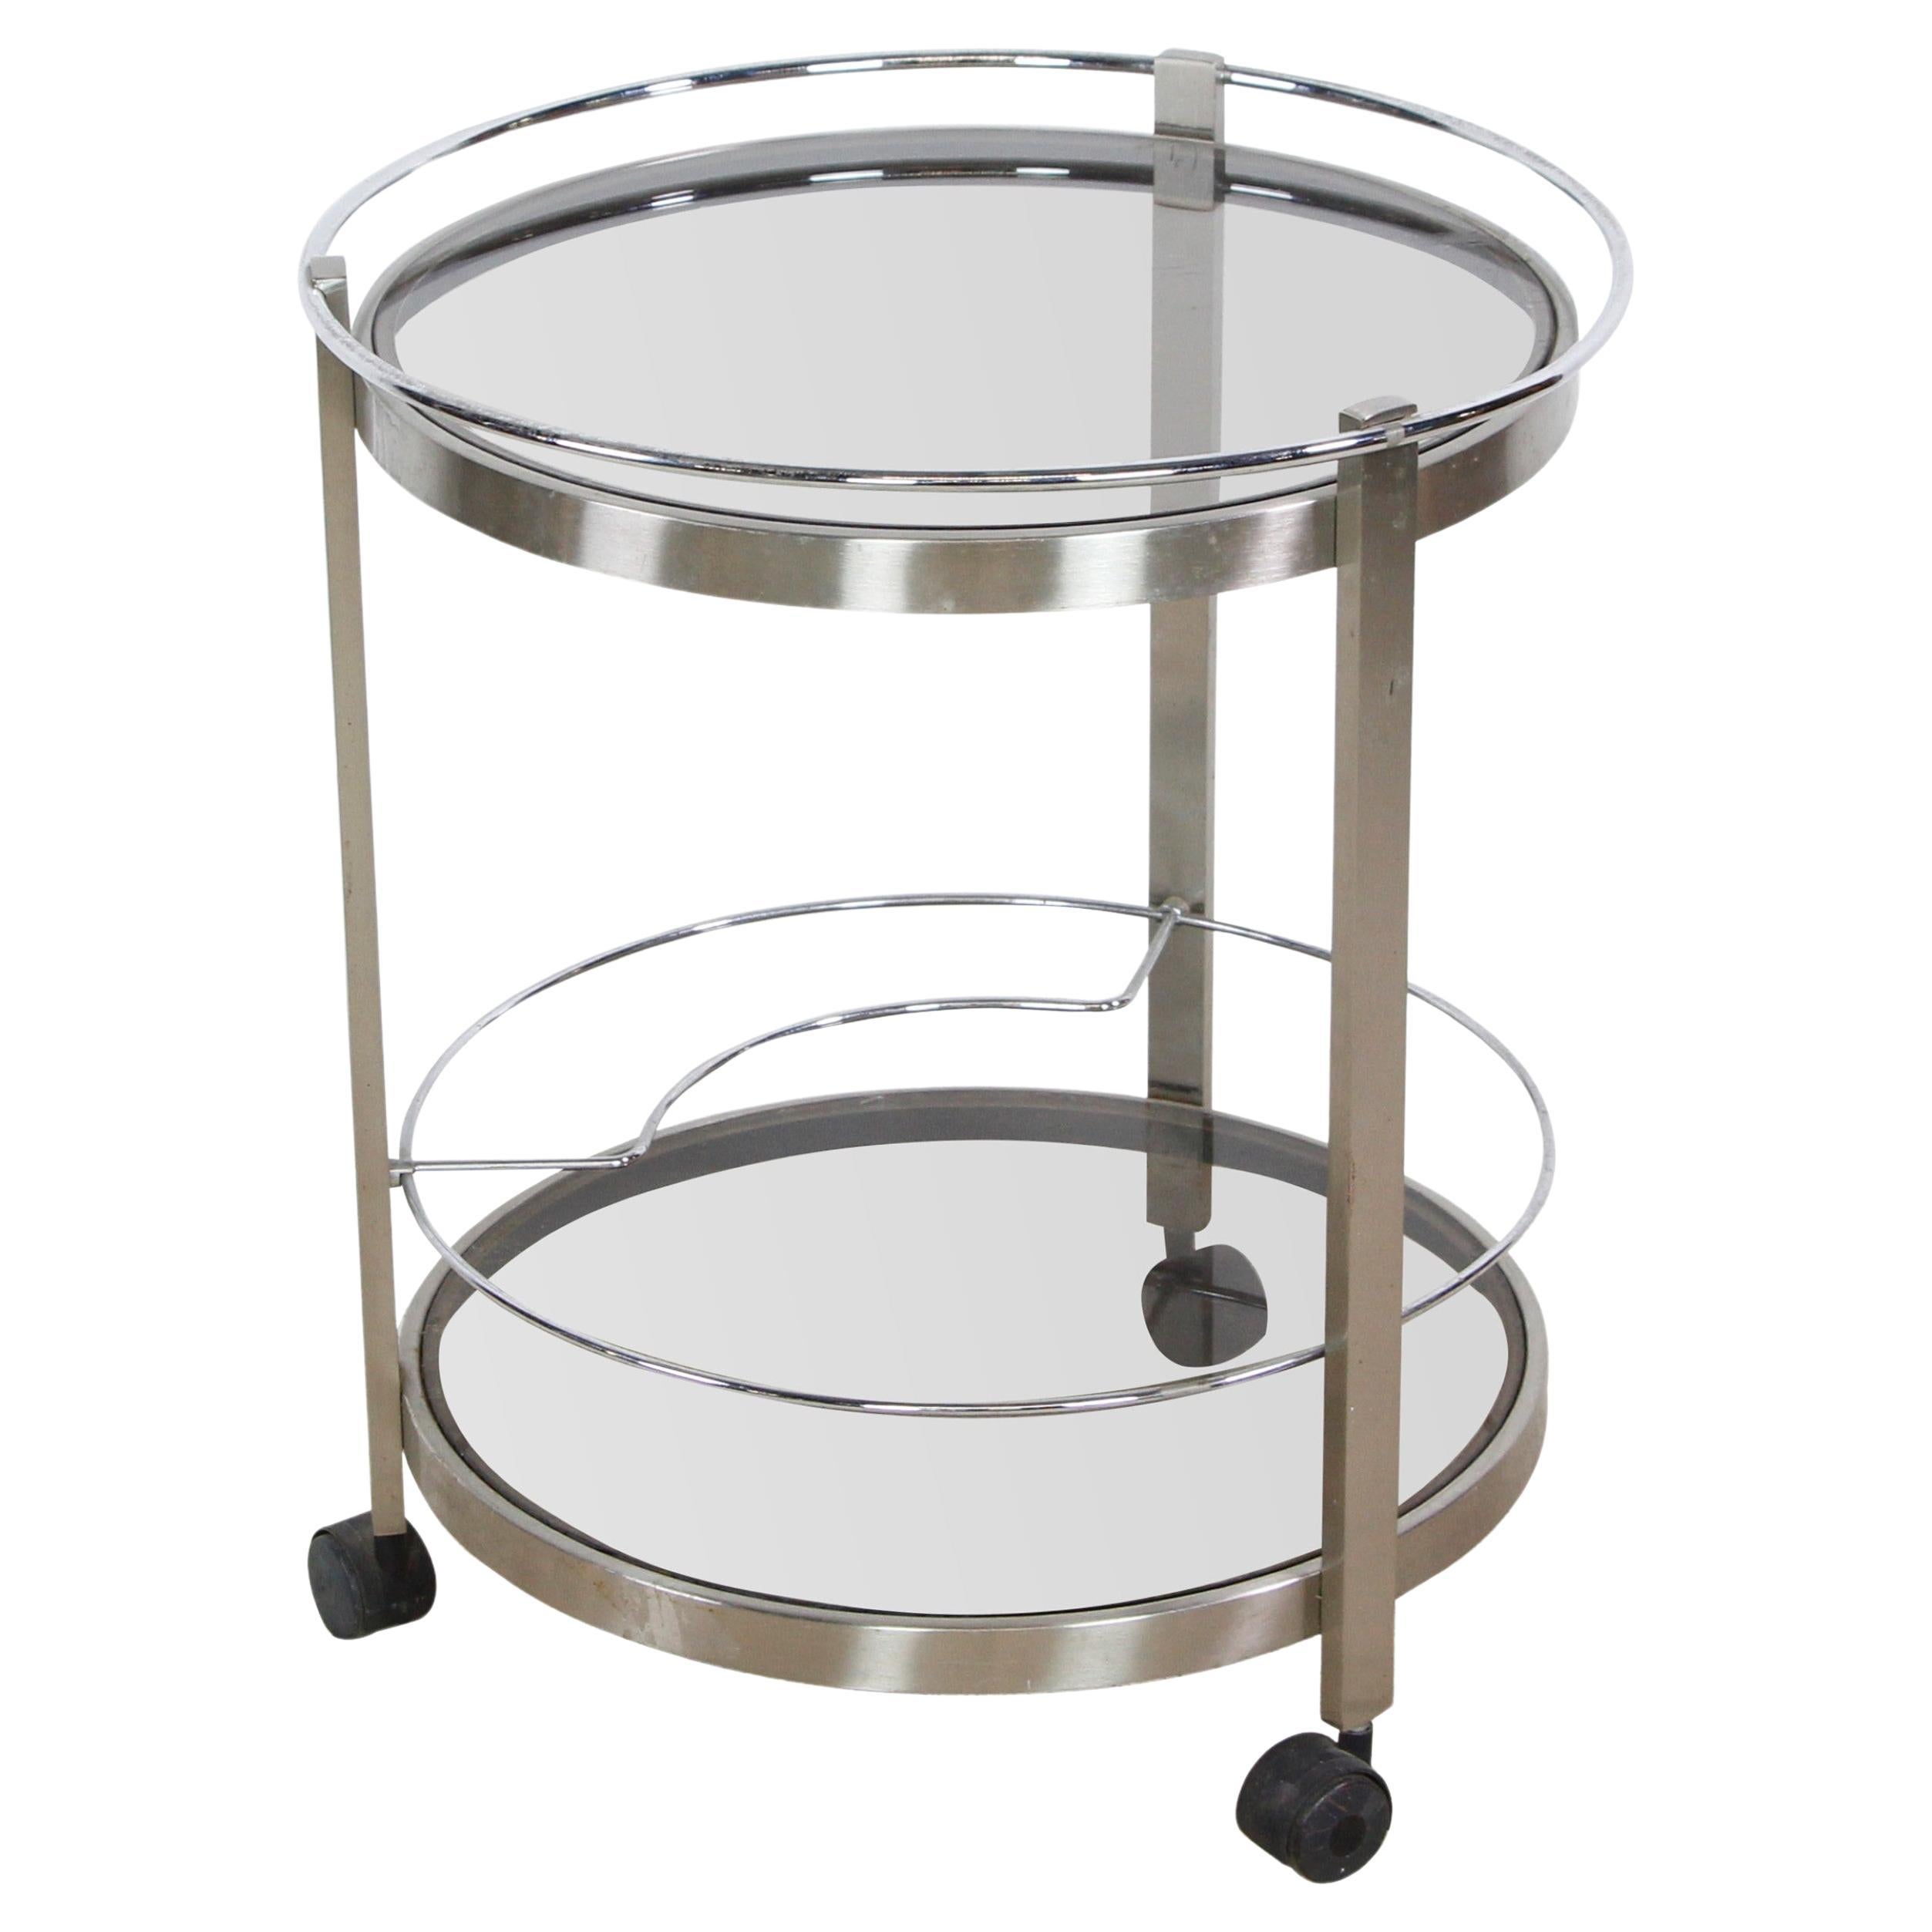 European Nickeled Steel Round Tinted Glass Bar Cart For Sale